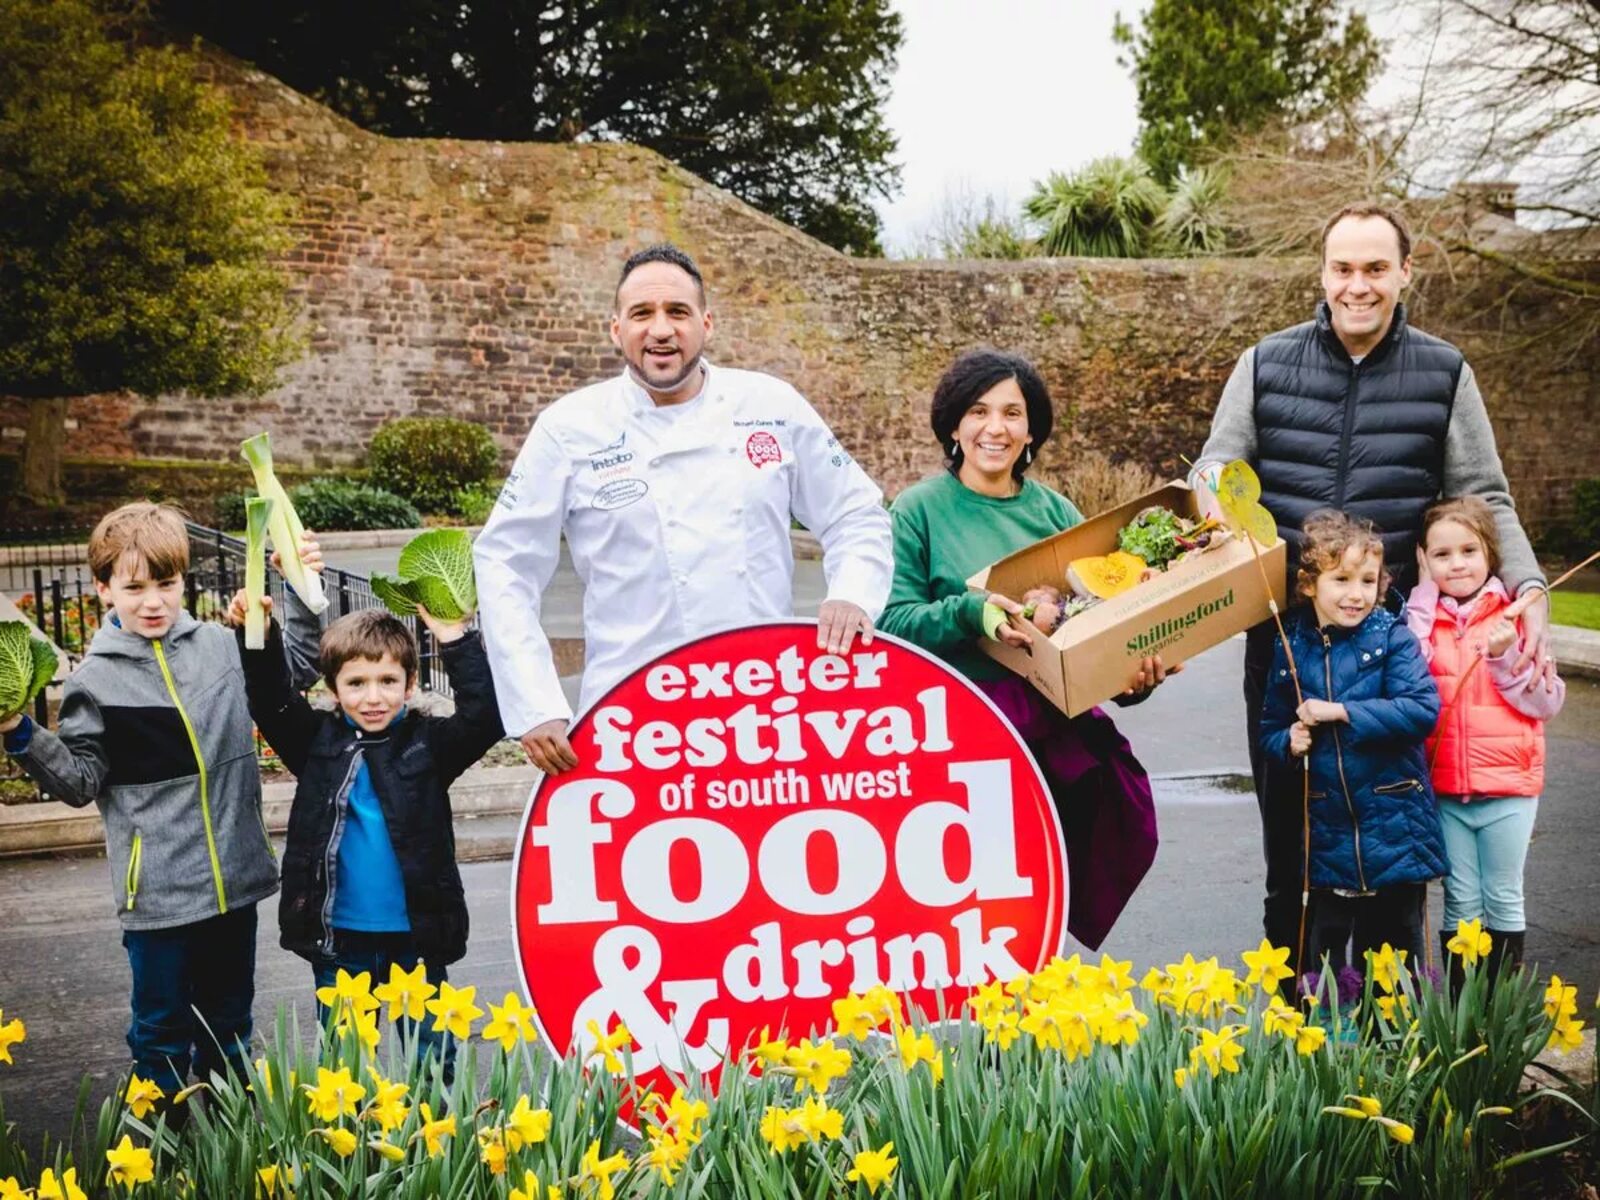 8-facts-about-exeter-festival-of-south-west-food-and-drink